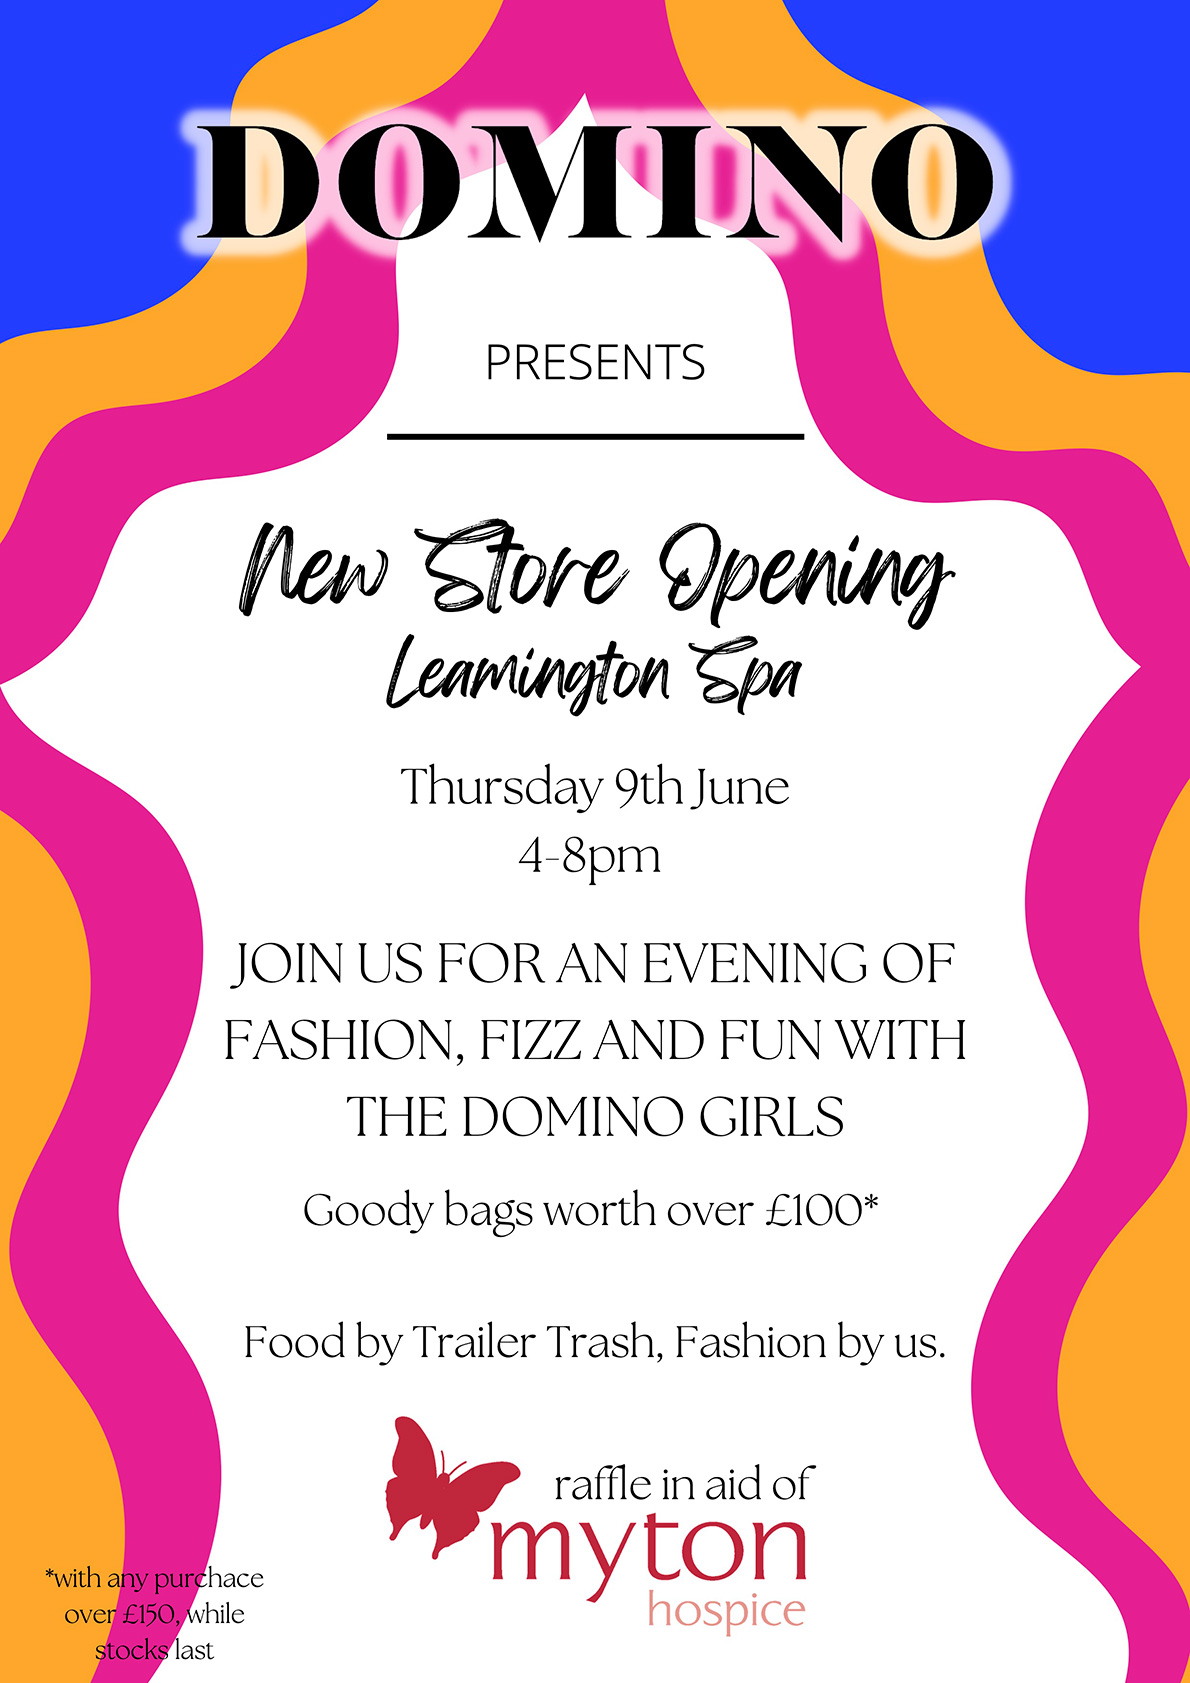 Domino Style is set to officially Launch their Leamington Store on 9th June 2022!